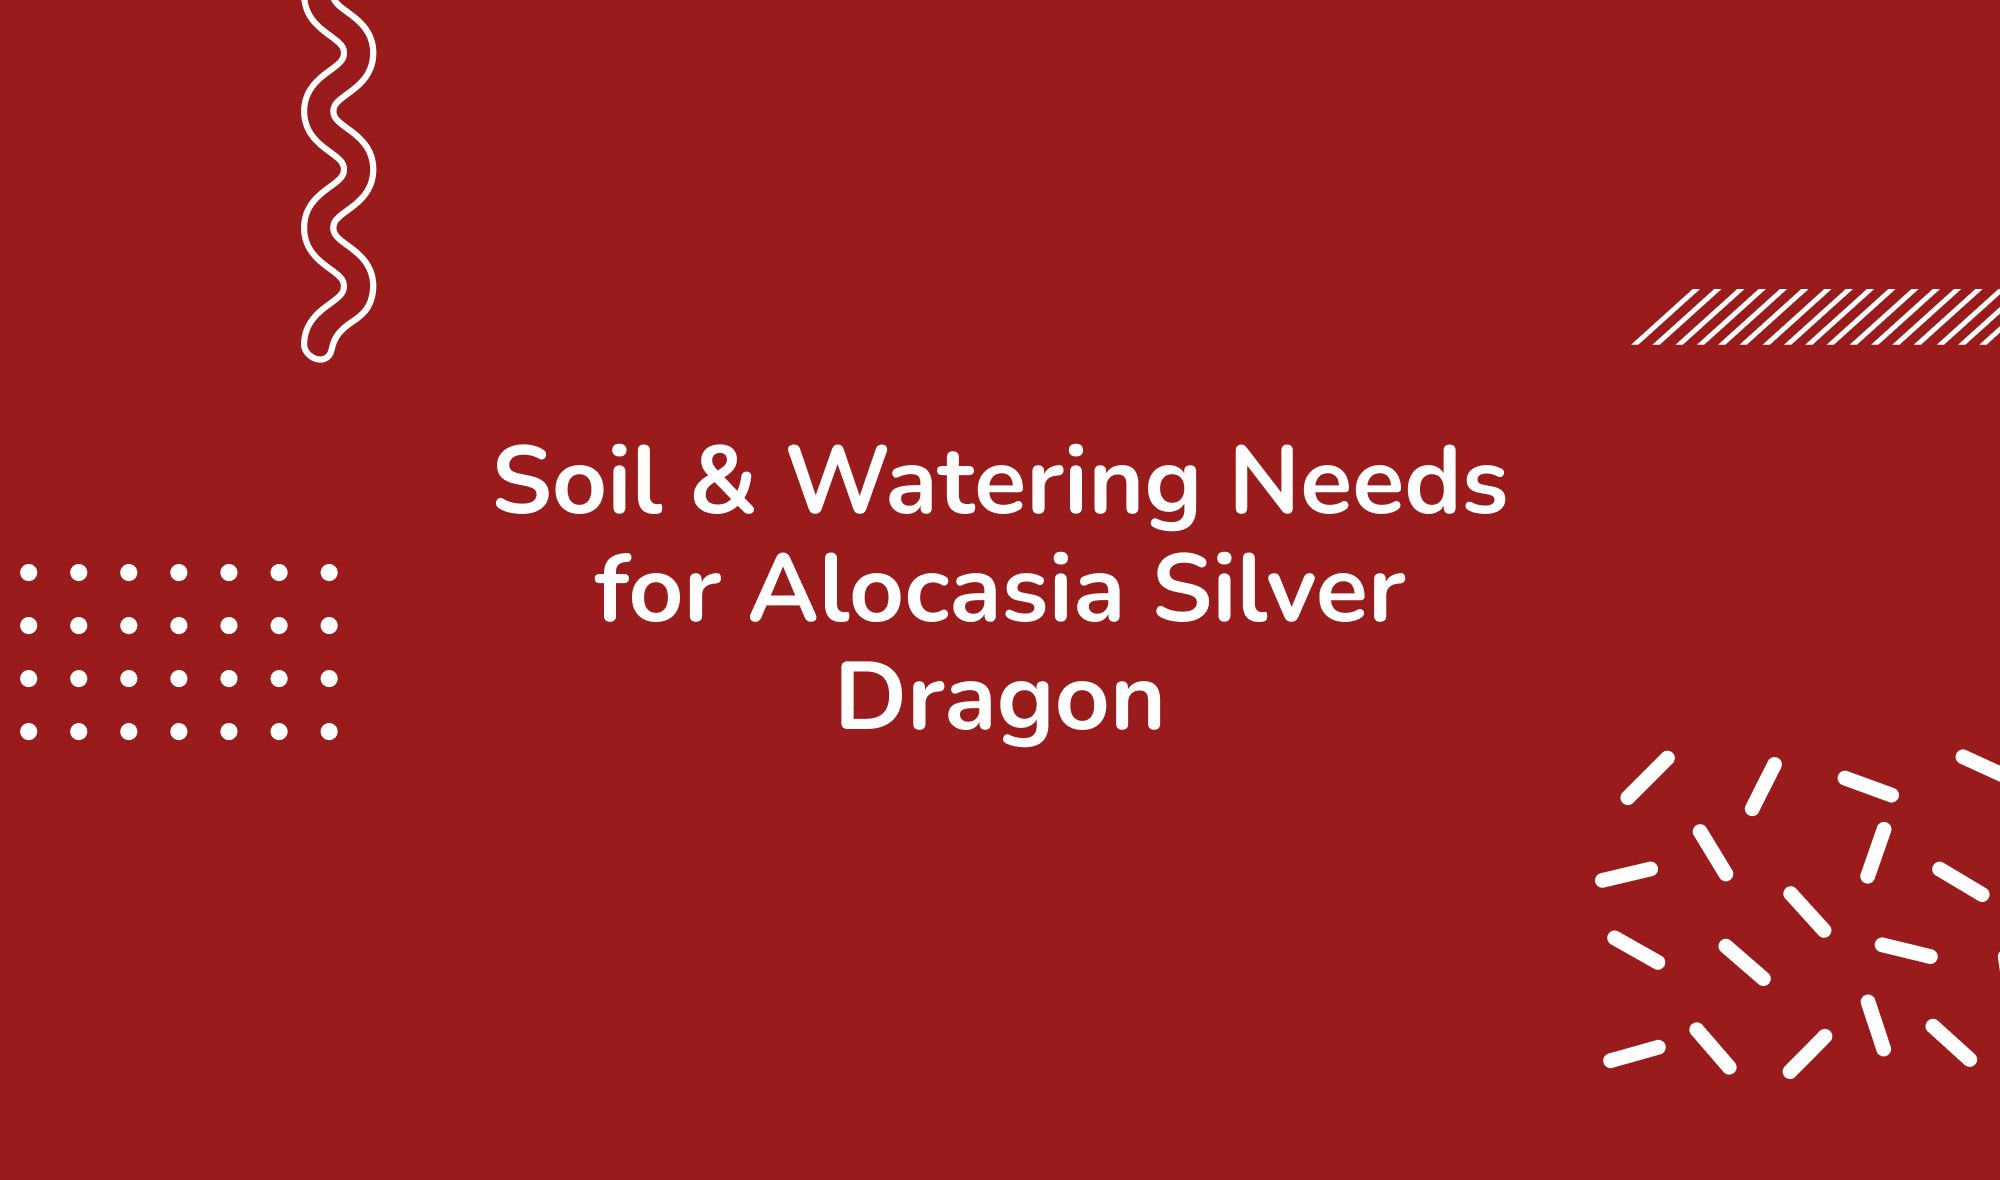 Soil & Watering Needs for Alocasia Silver Dragon